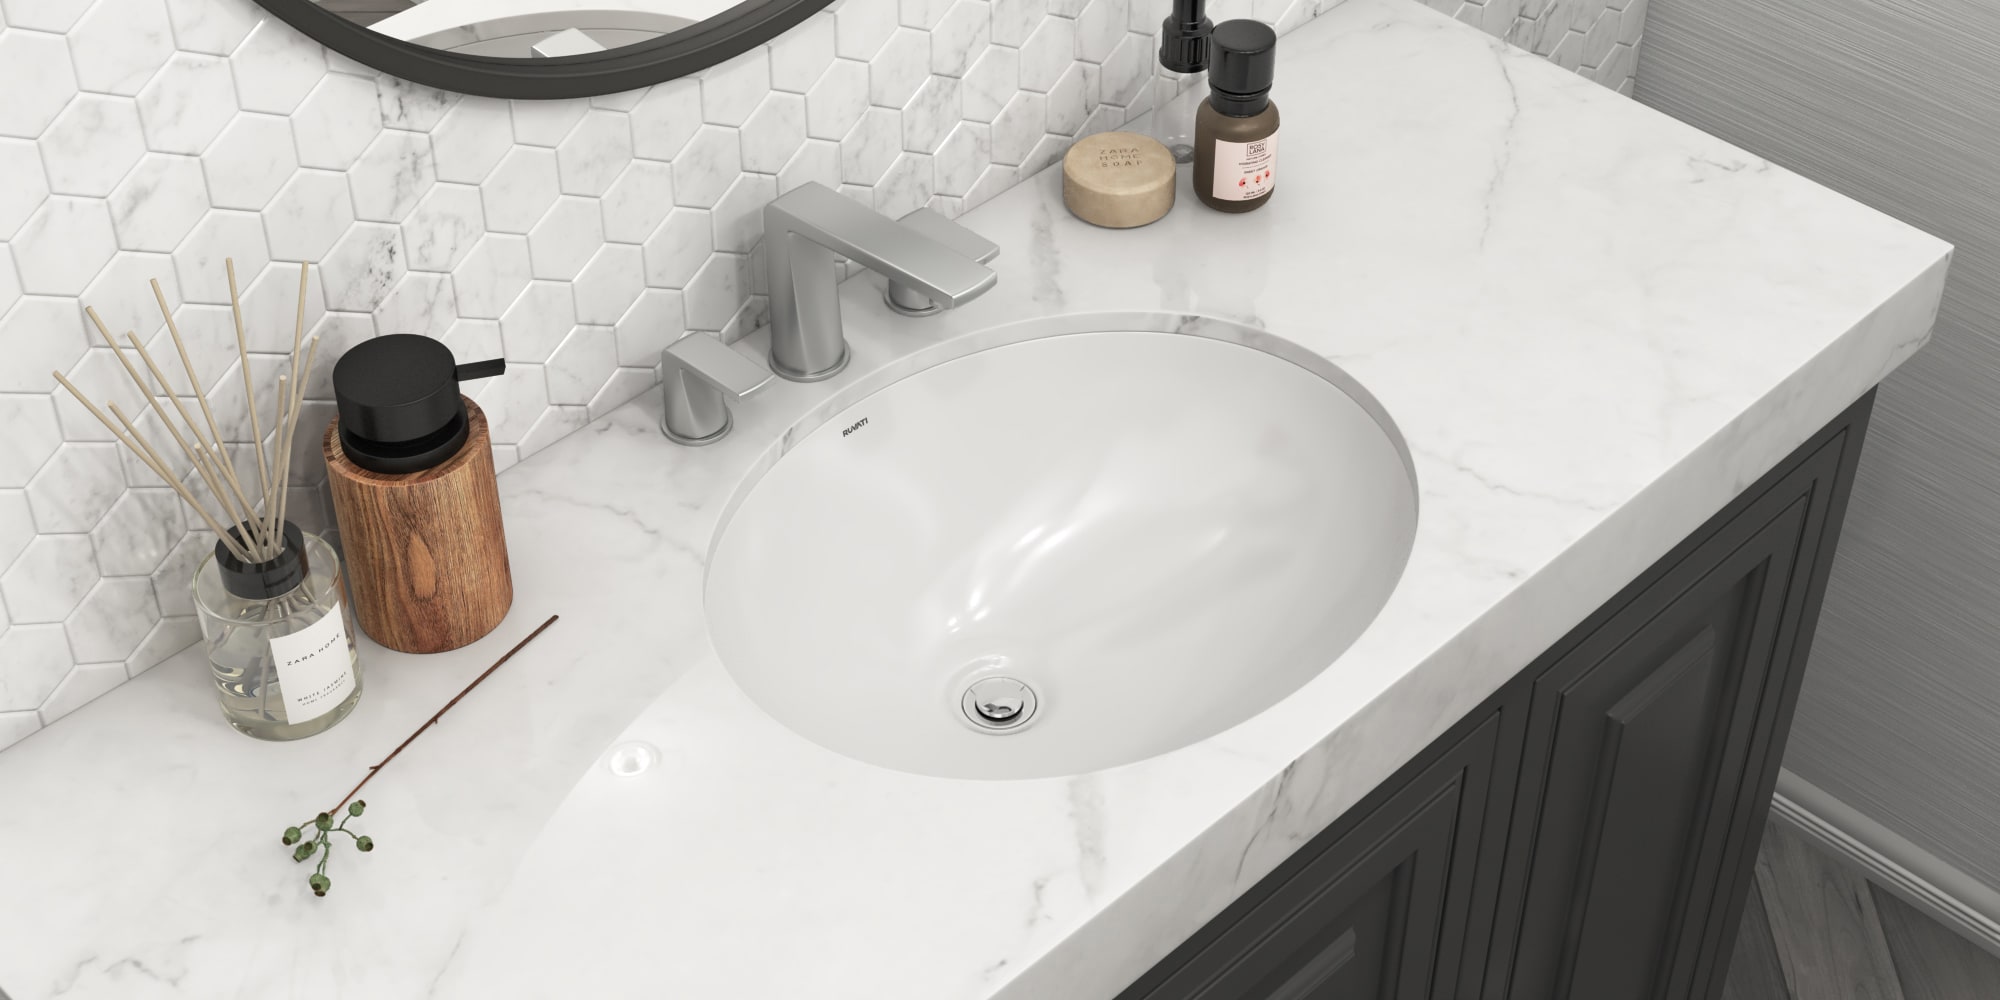 16.5-in. W CSA Oval Undermount Sink Set in White - Chrome Hardware - Overflow Drain Incl.